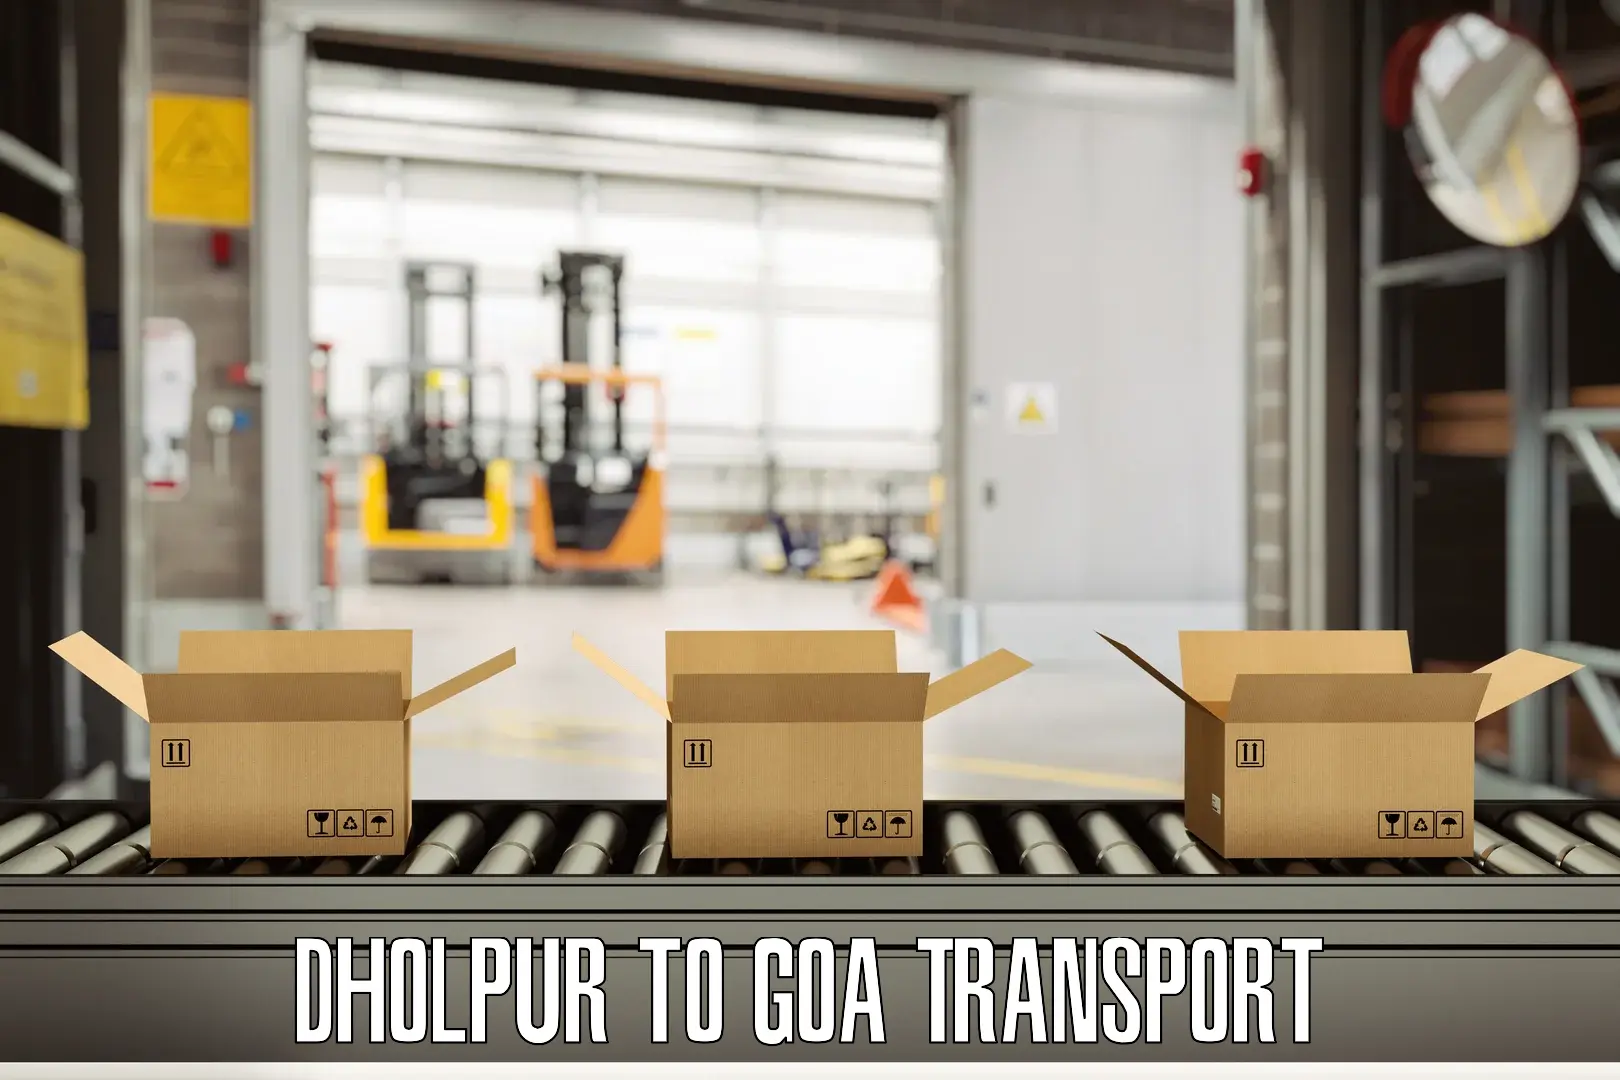 Container transport service Dholpur to Goa